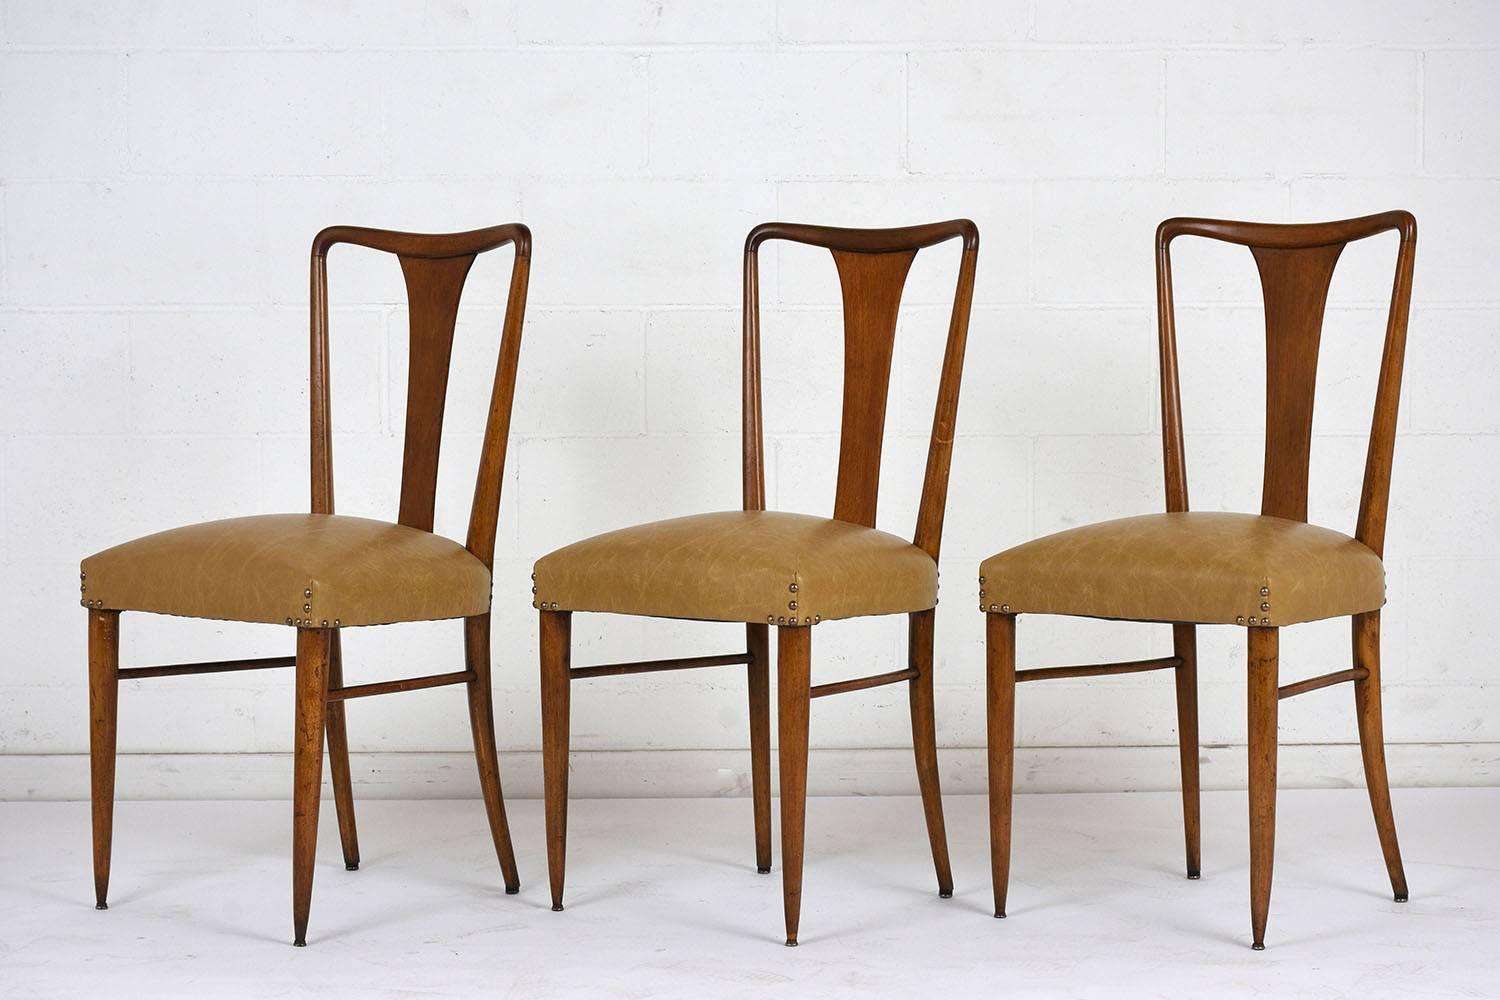 This set of six Modern-style dining chairs feature wood frames stained a light walnut color with a lacquered finish. The seat backs have curved edges and a simple splat. The tapered legs have stretched bars and are finished with brass toe caps. The